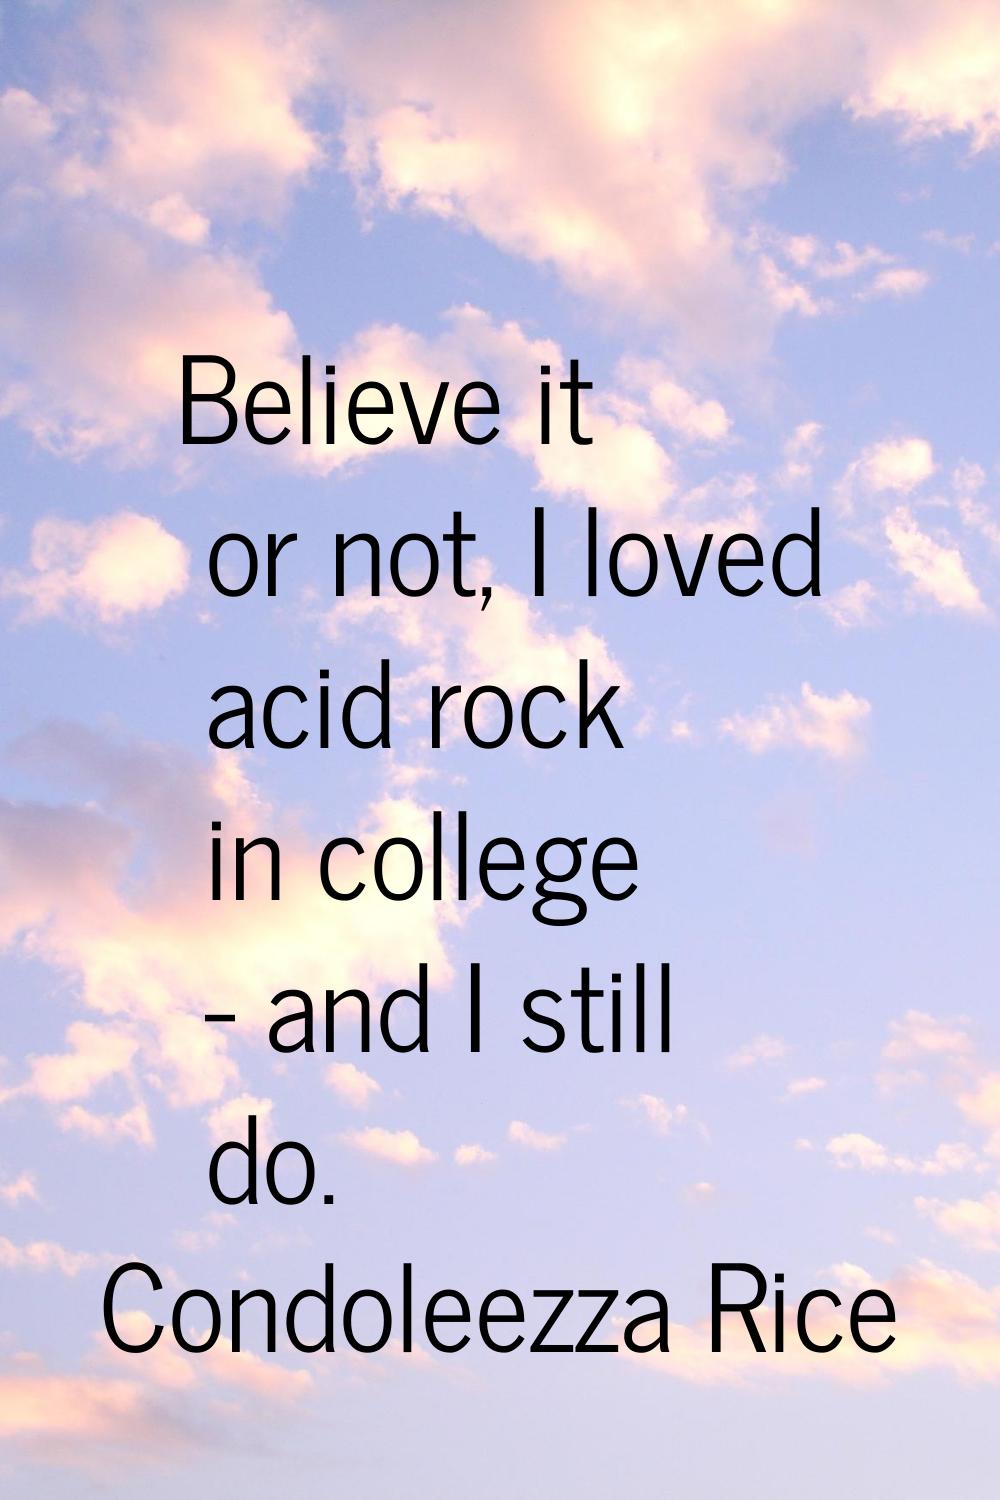 Believe it or not, I loved acid rock in college - and I still do.